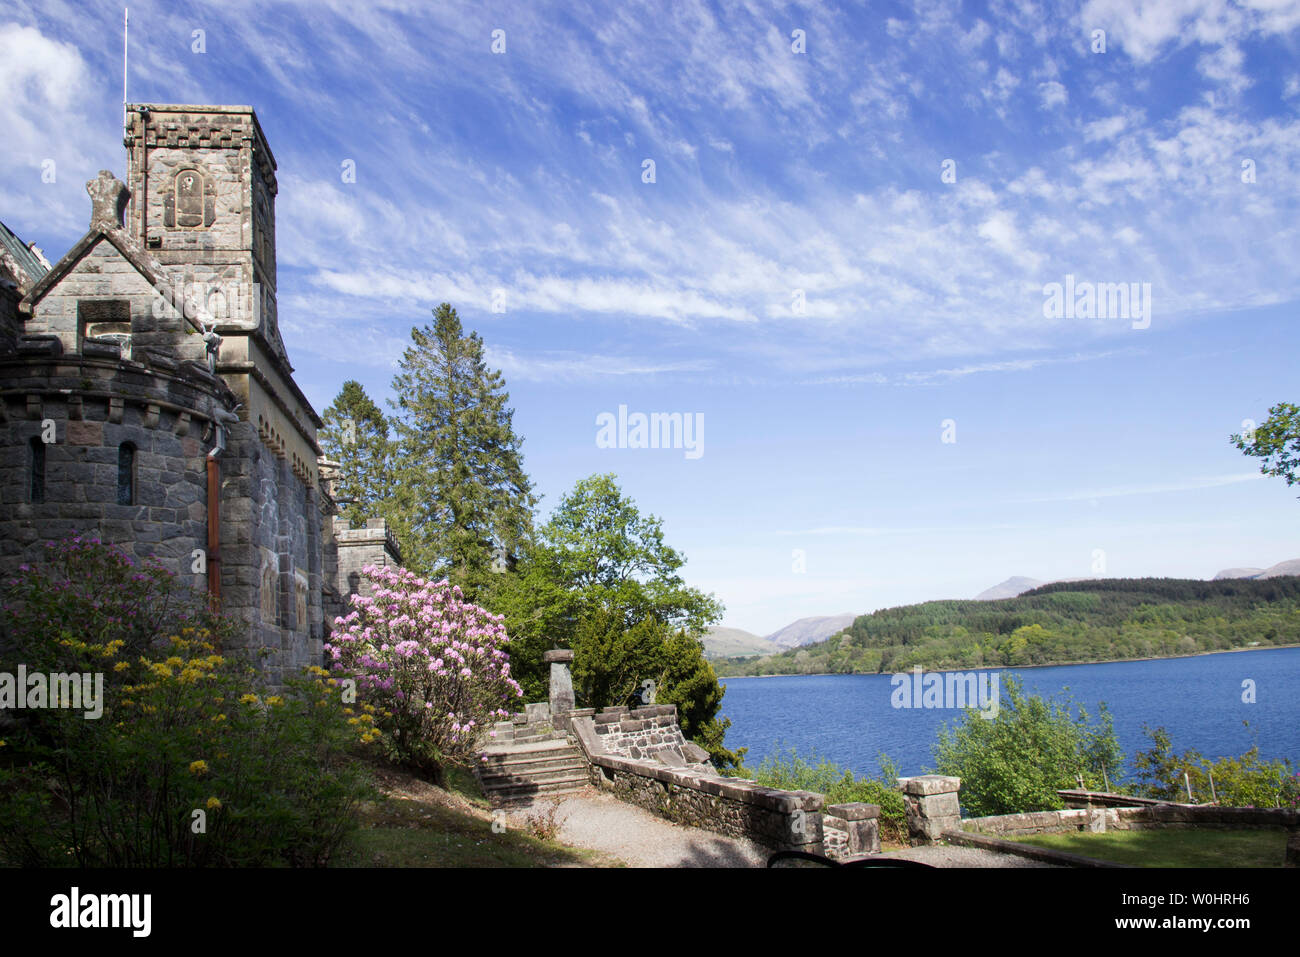 St Conan's Kirk on the shore of Loch Awe, Argyll and Bute, Scotland. Stock Photo